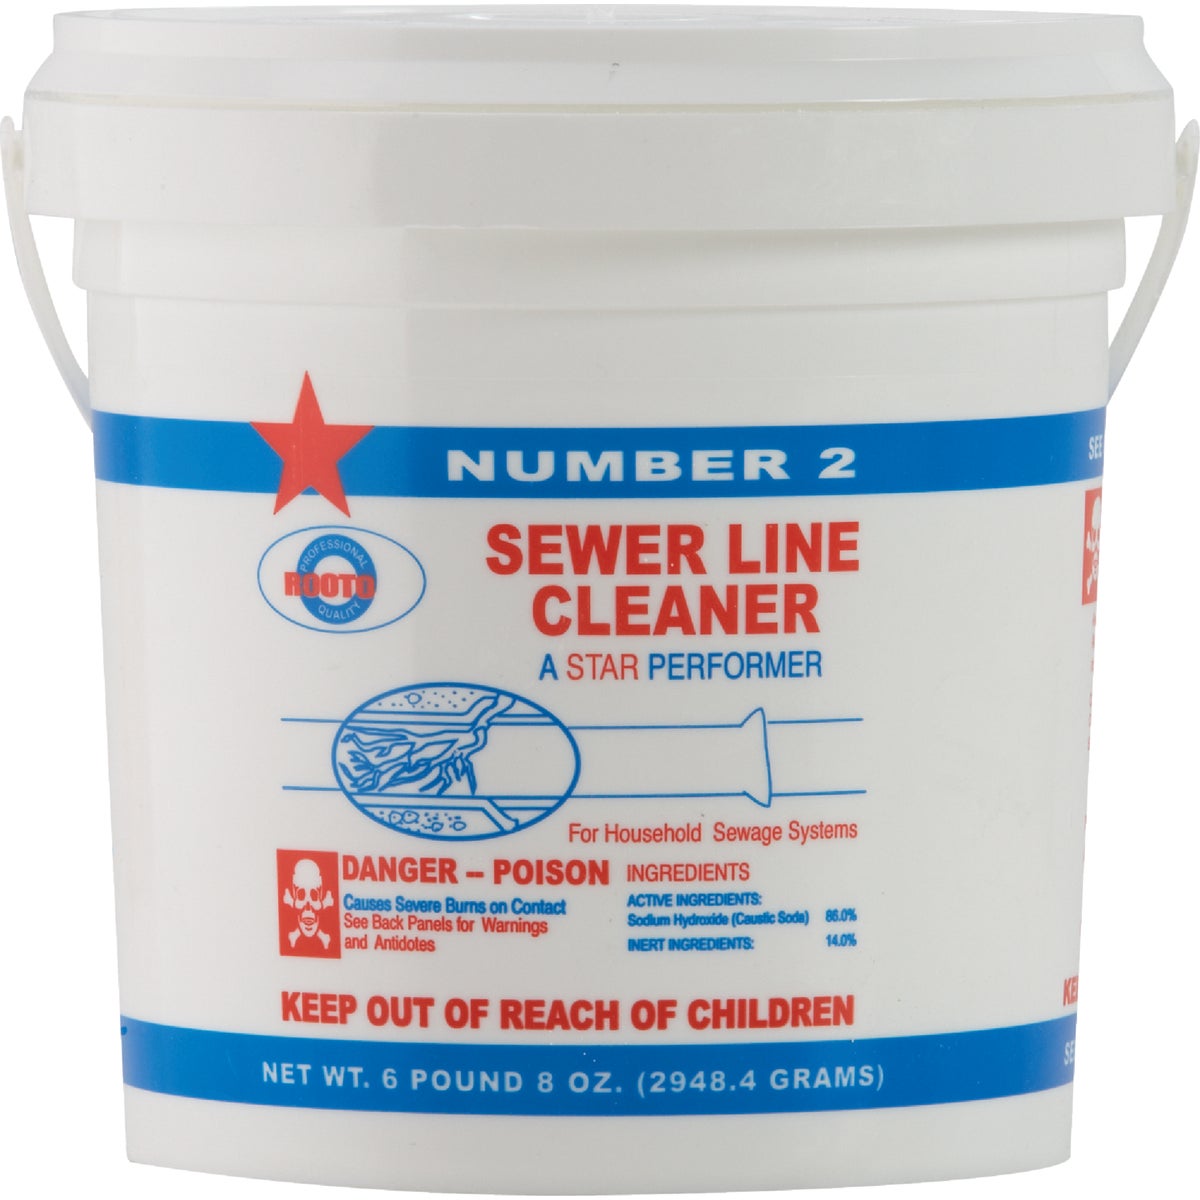 Item 477702, Professional quality sewer line cleaner for household sewage systems with 